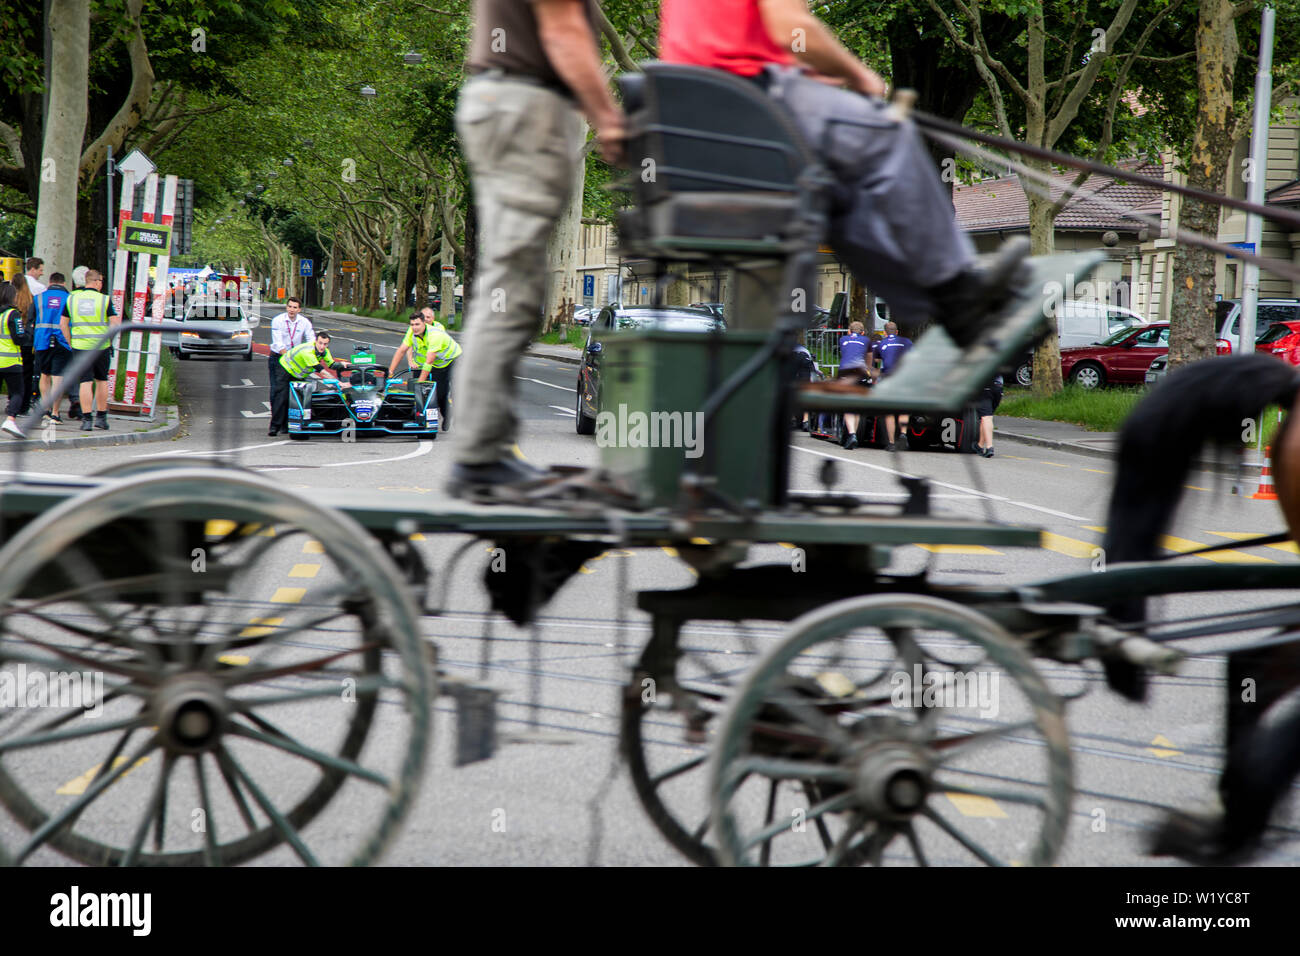 A horse caddy speeds past while crew members push one of the HWA Formula E cars from the pitlane back to the garage ahead of the  ABB FIA Formula E race in Bern. Stock Photo